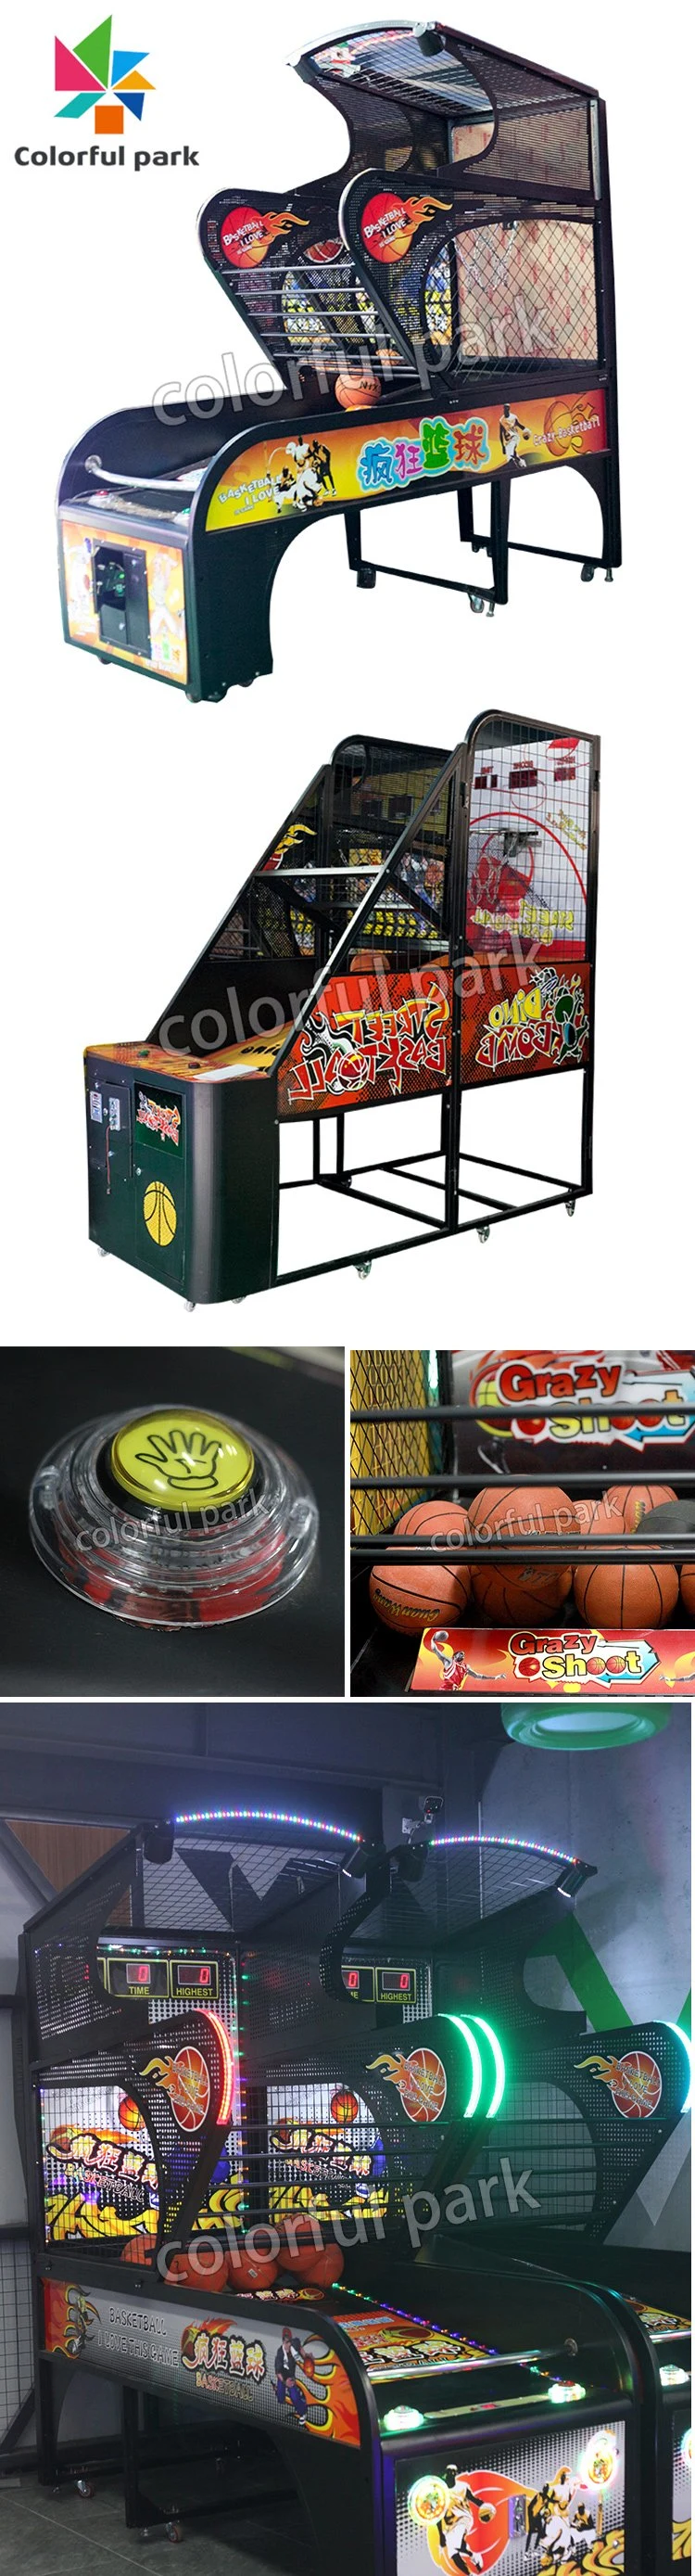 Colorful Park Indoor Sport Game Basketball Coin Operated Street Basketball Arcade Game Machine